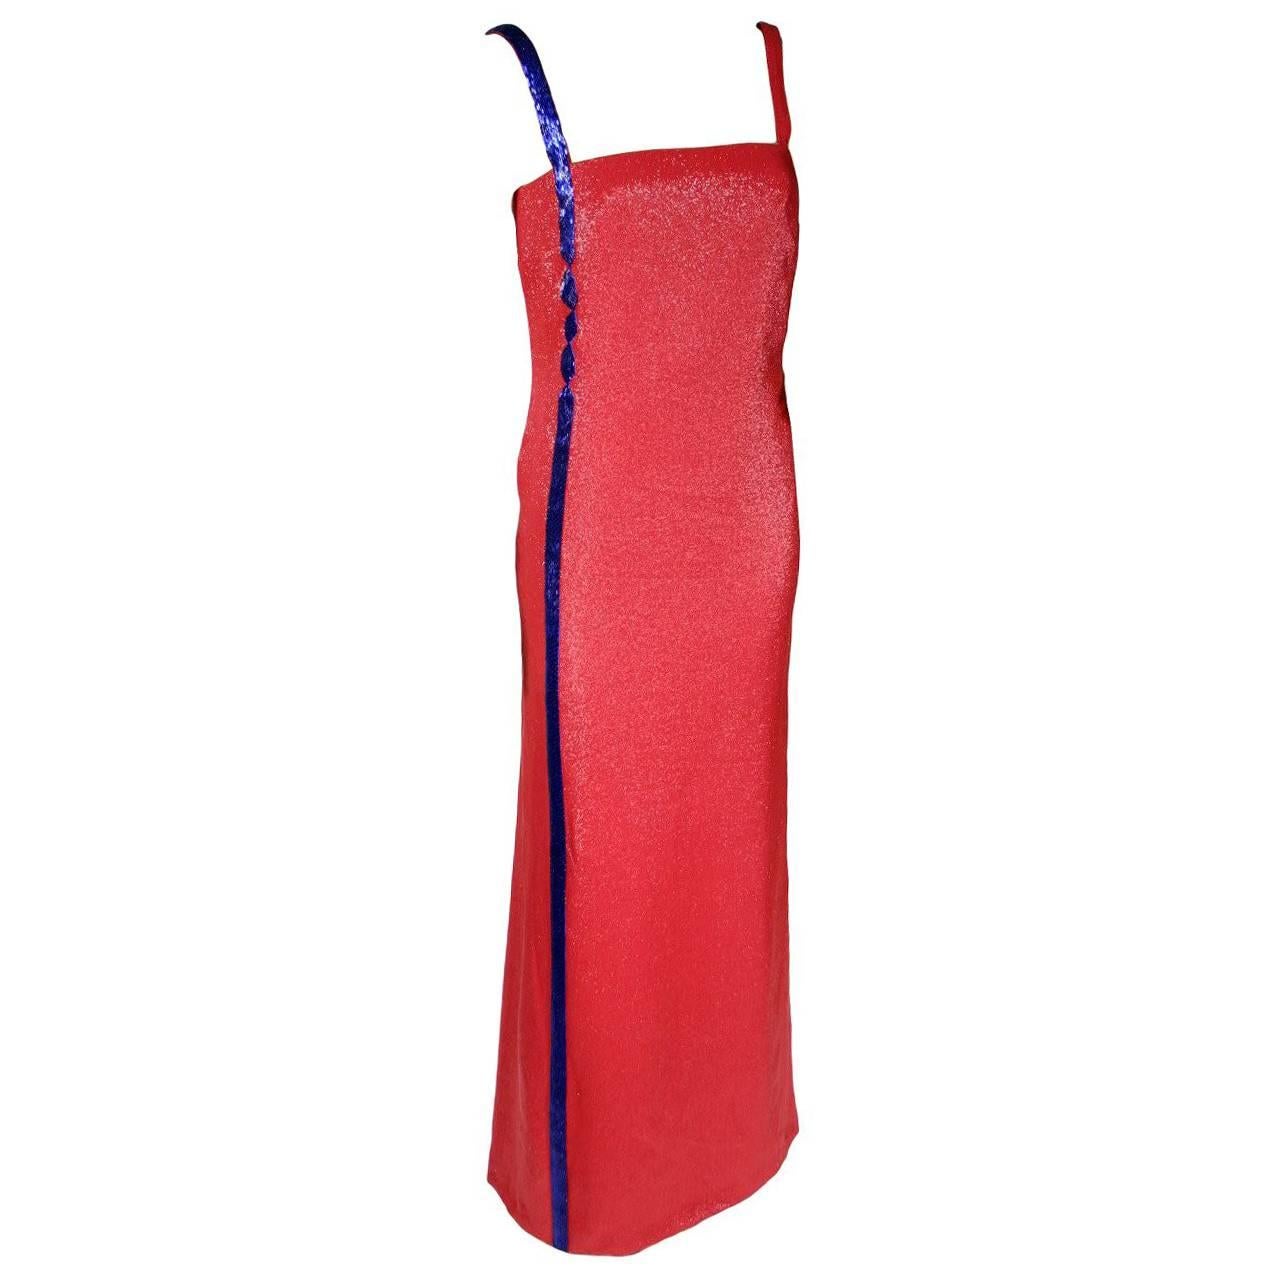 Collectible A/W 1997 GIANNI VERSACE COUTURE EMBELLISHED RED GOWN Sz 42 For Sale